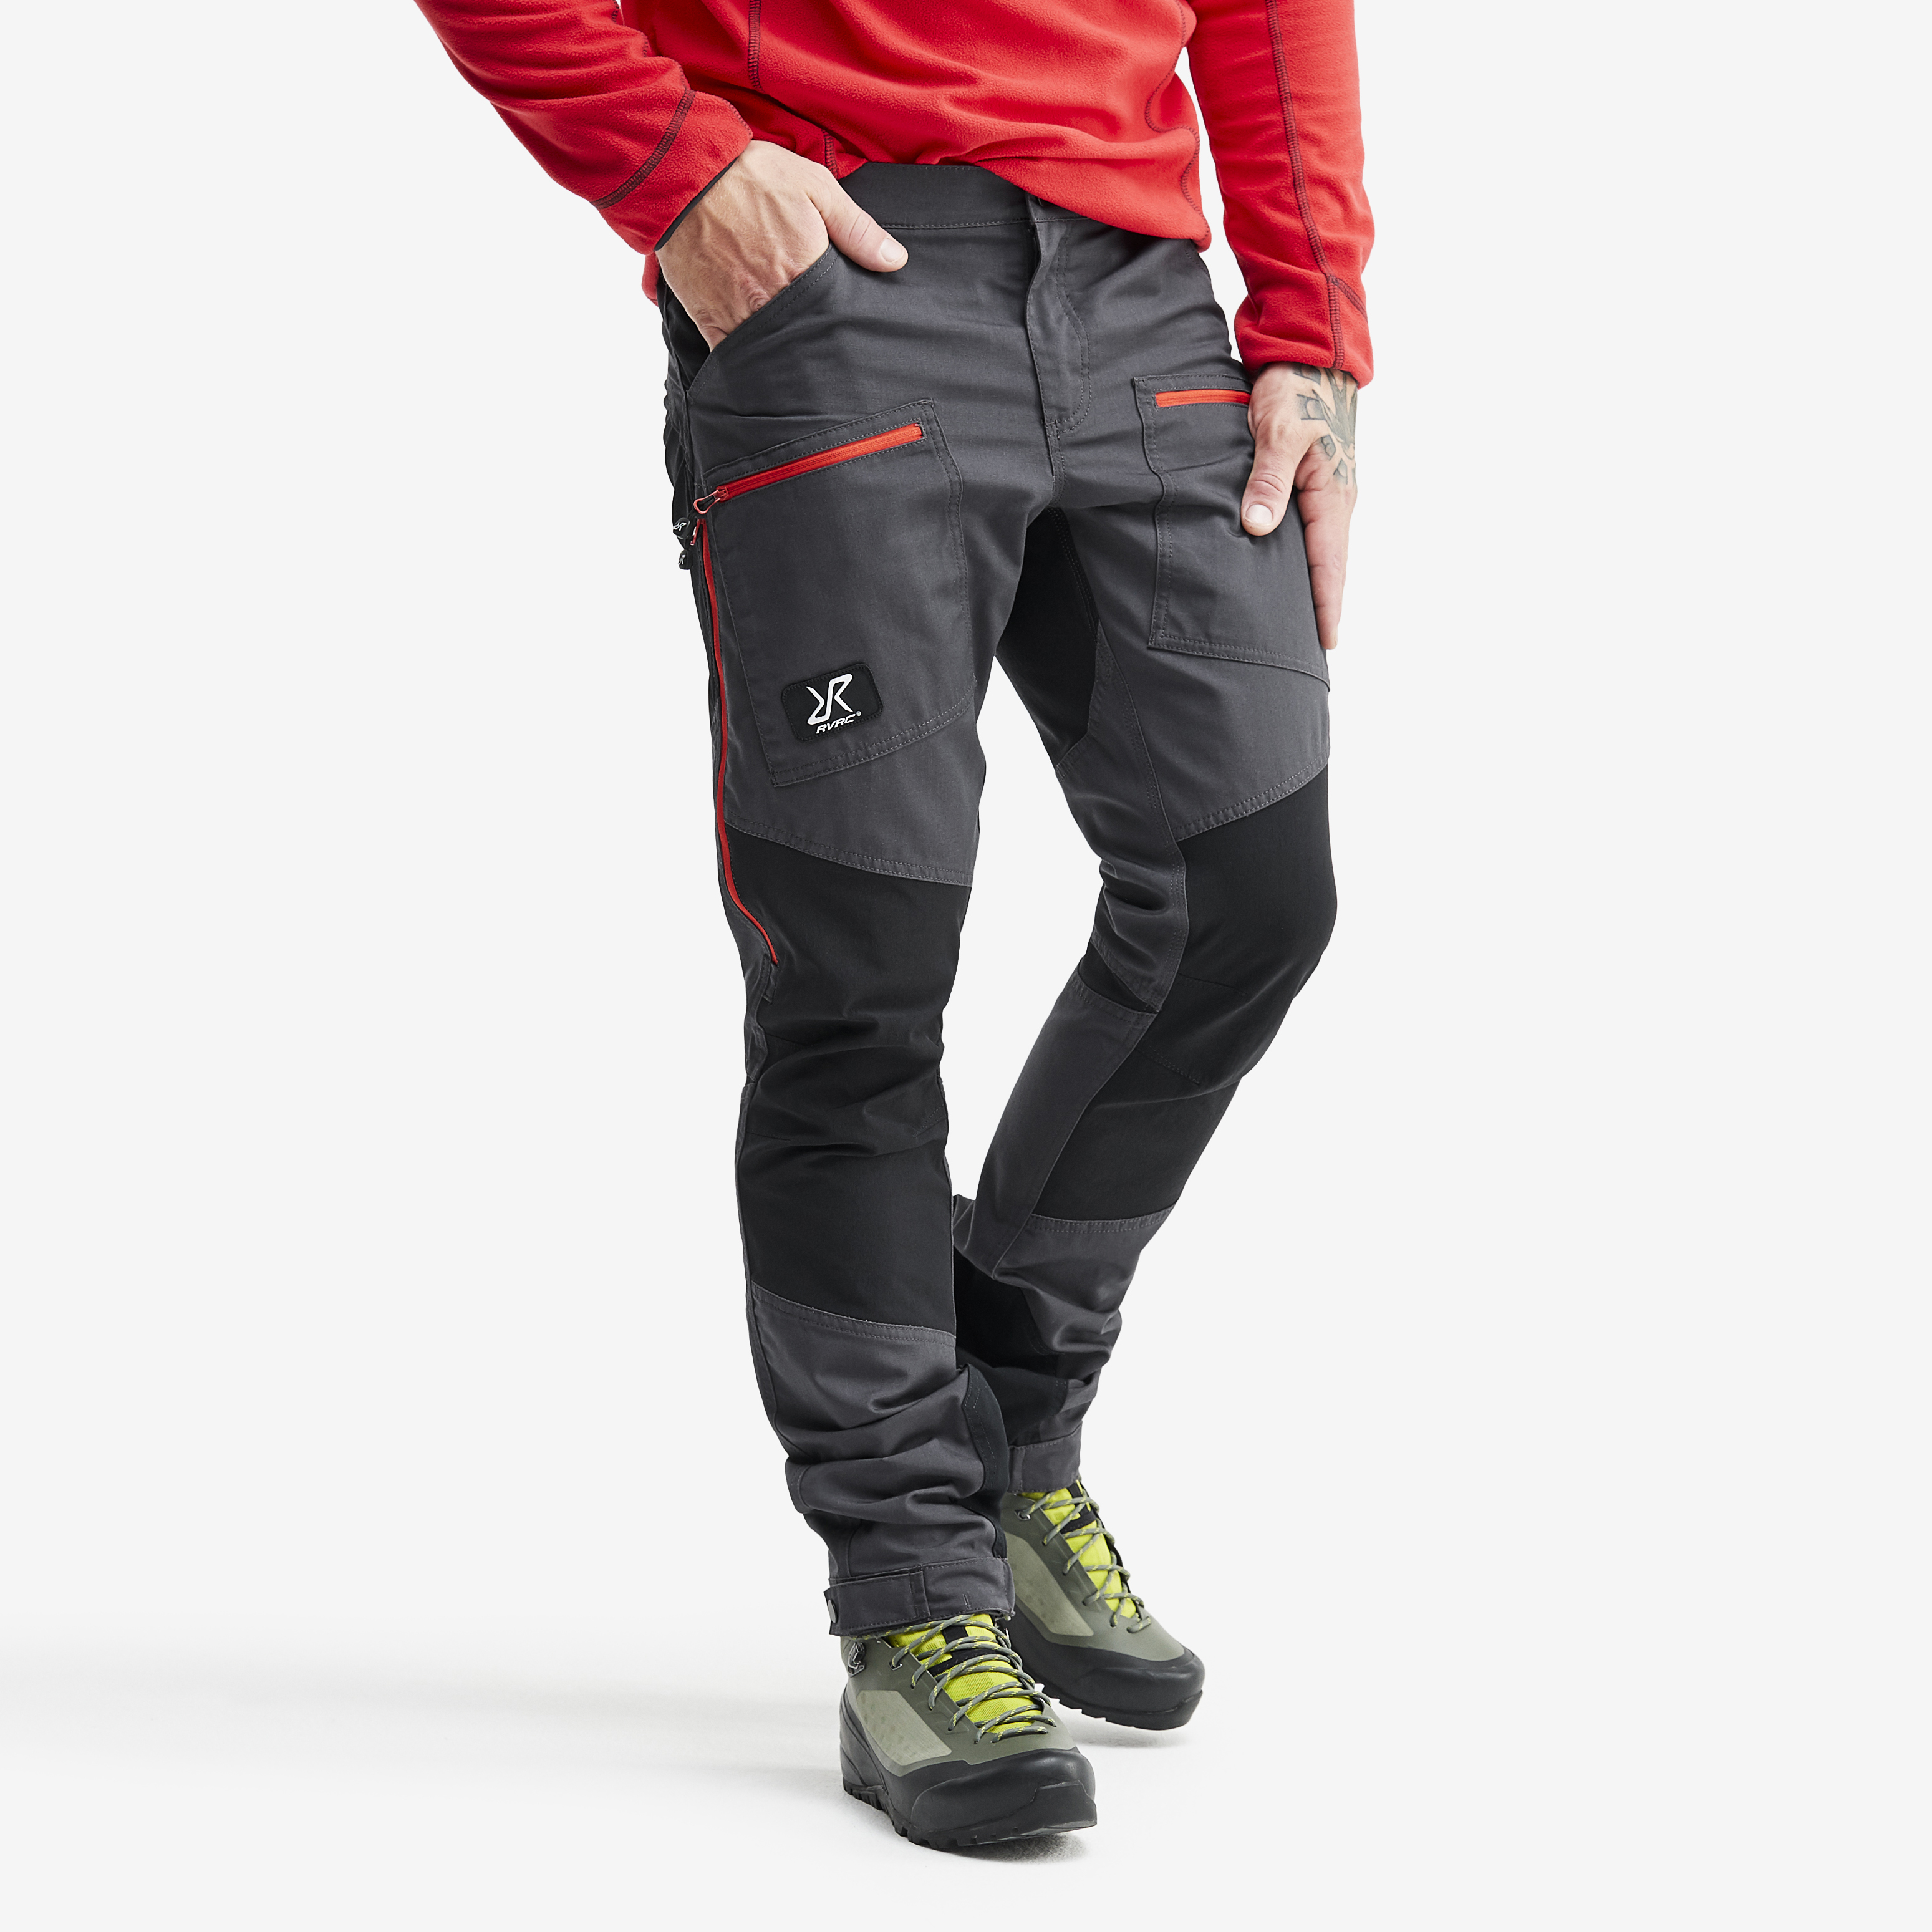 Nordwand Pro hiking pants for men in dark grey